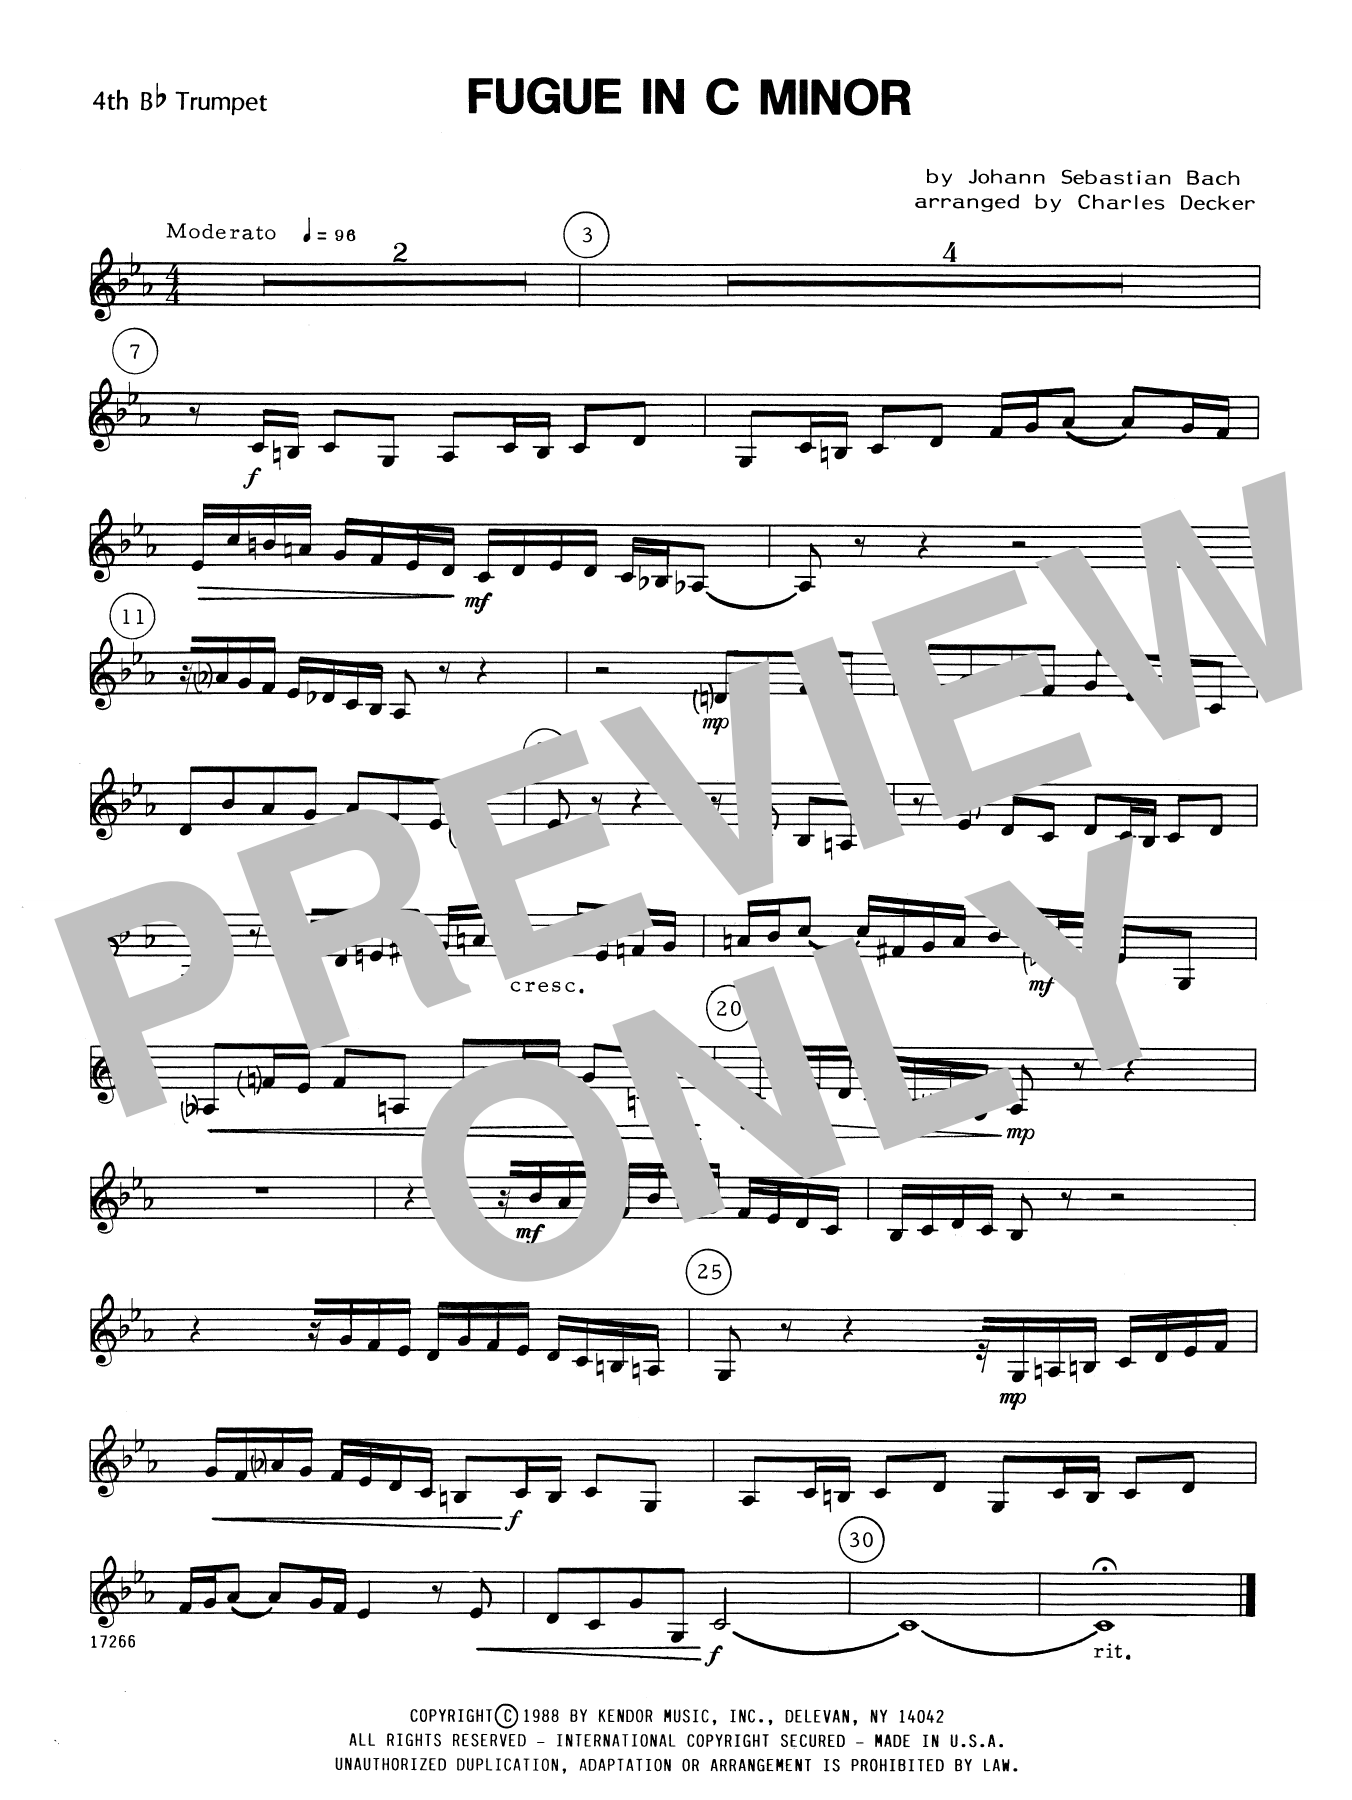 Charles Decker Fugue In C Minor - 4th Bb Trumpet sheet music notes and chords. Download Printable PDF.